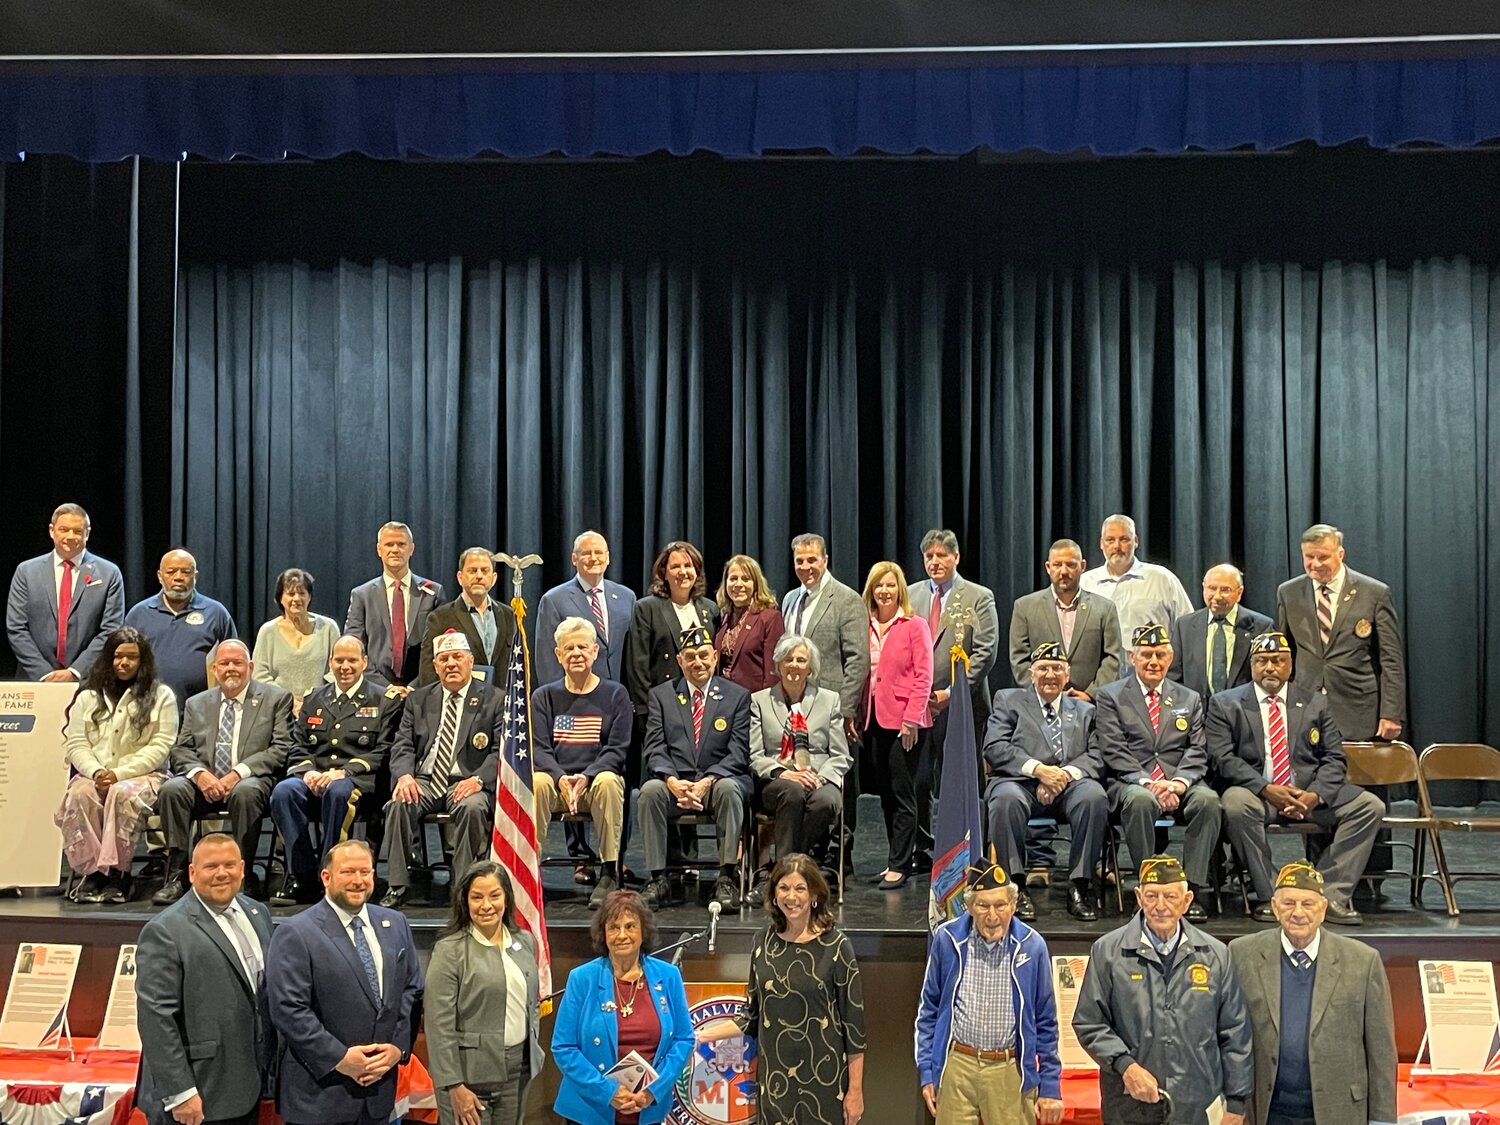 State Sen. Patricia Canzoneri-Fitzpatrick honored 23 veterans at a ceremony on Sunday. The honorees all had different backgrounds, but shared a dedication to service and sacrifice.